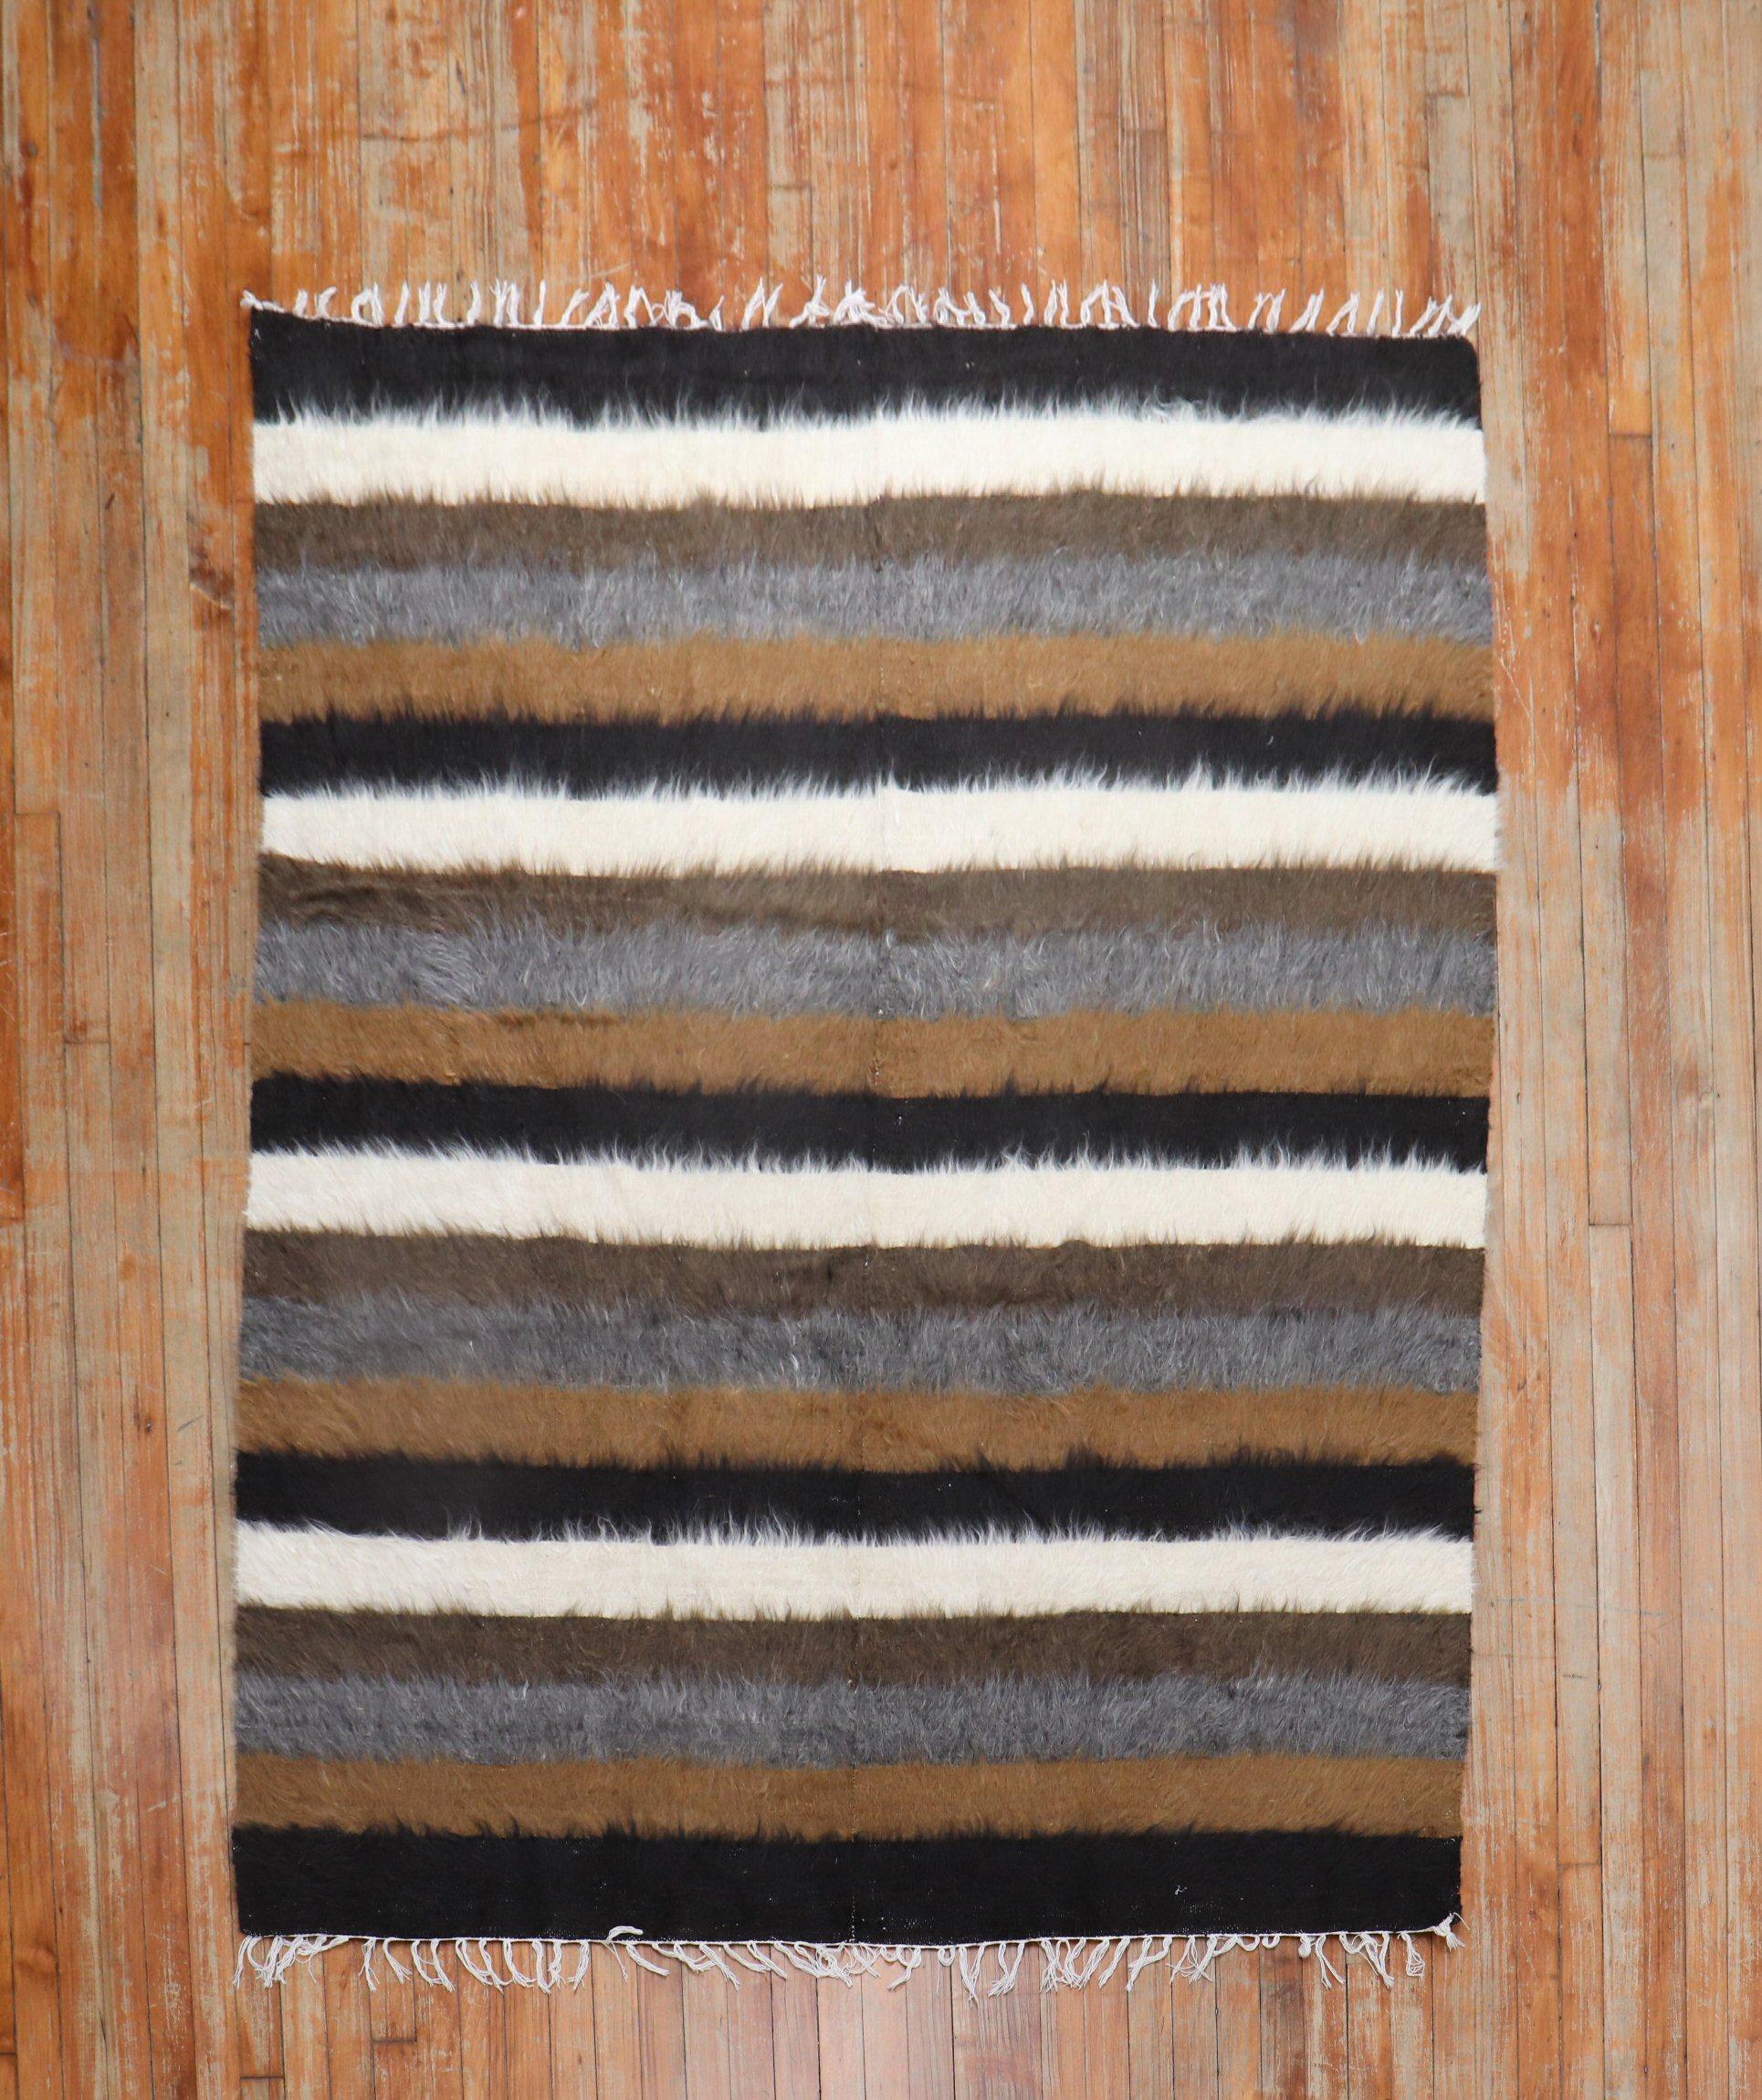 A mid-20th century one-of-a-kind Turkish Mohair Sirt rug woven with mohair wool. These pieces are inspired by traditional tribal weaving's but they are used mostly for decorative purposes and have a strong modernist appeal. The unique pile technique